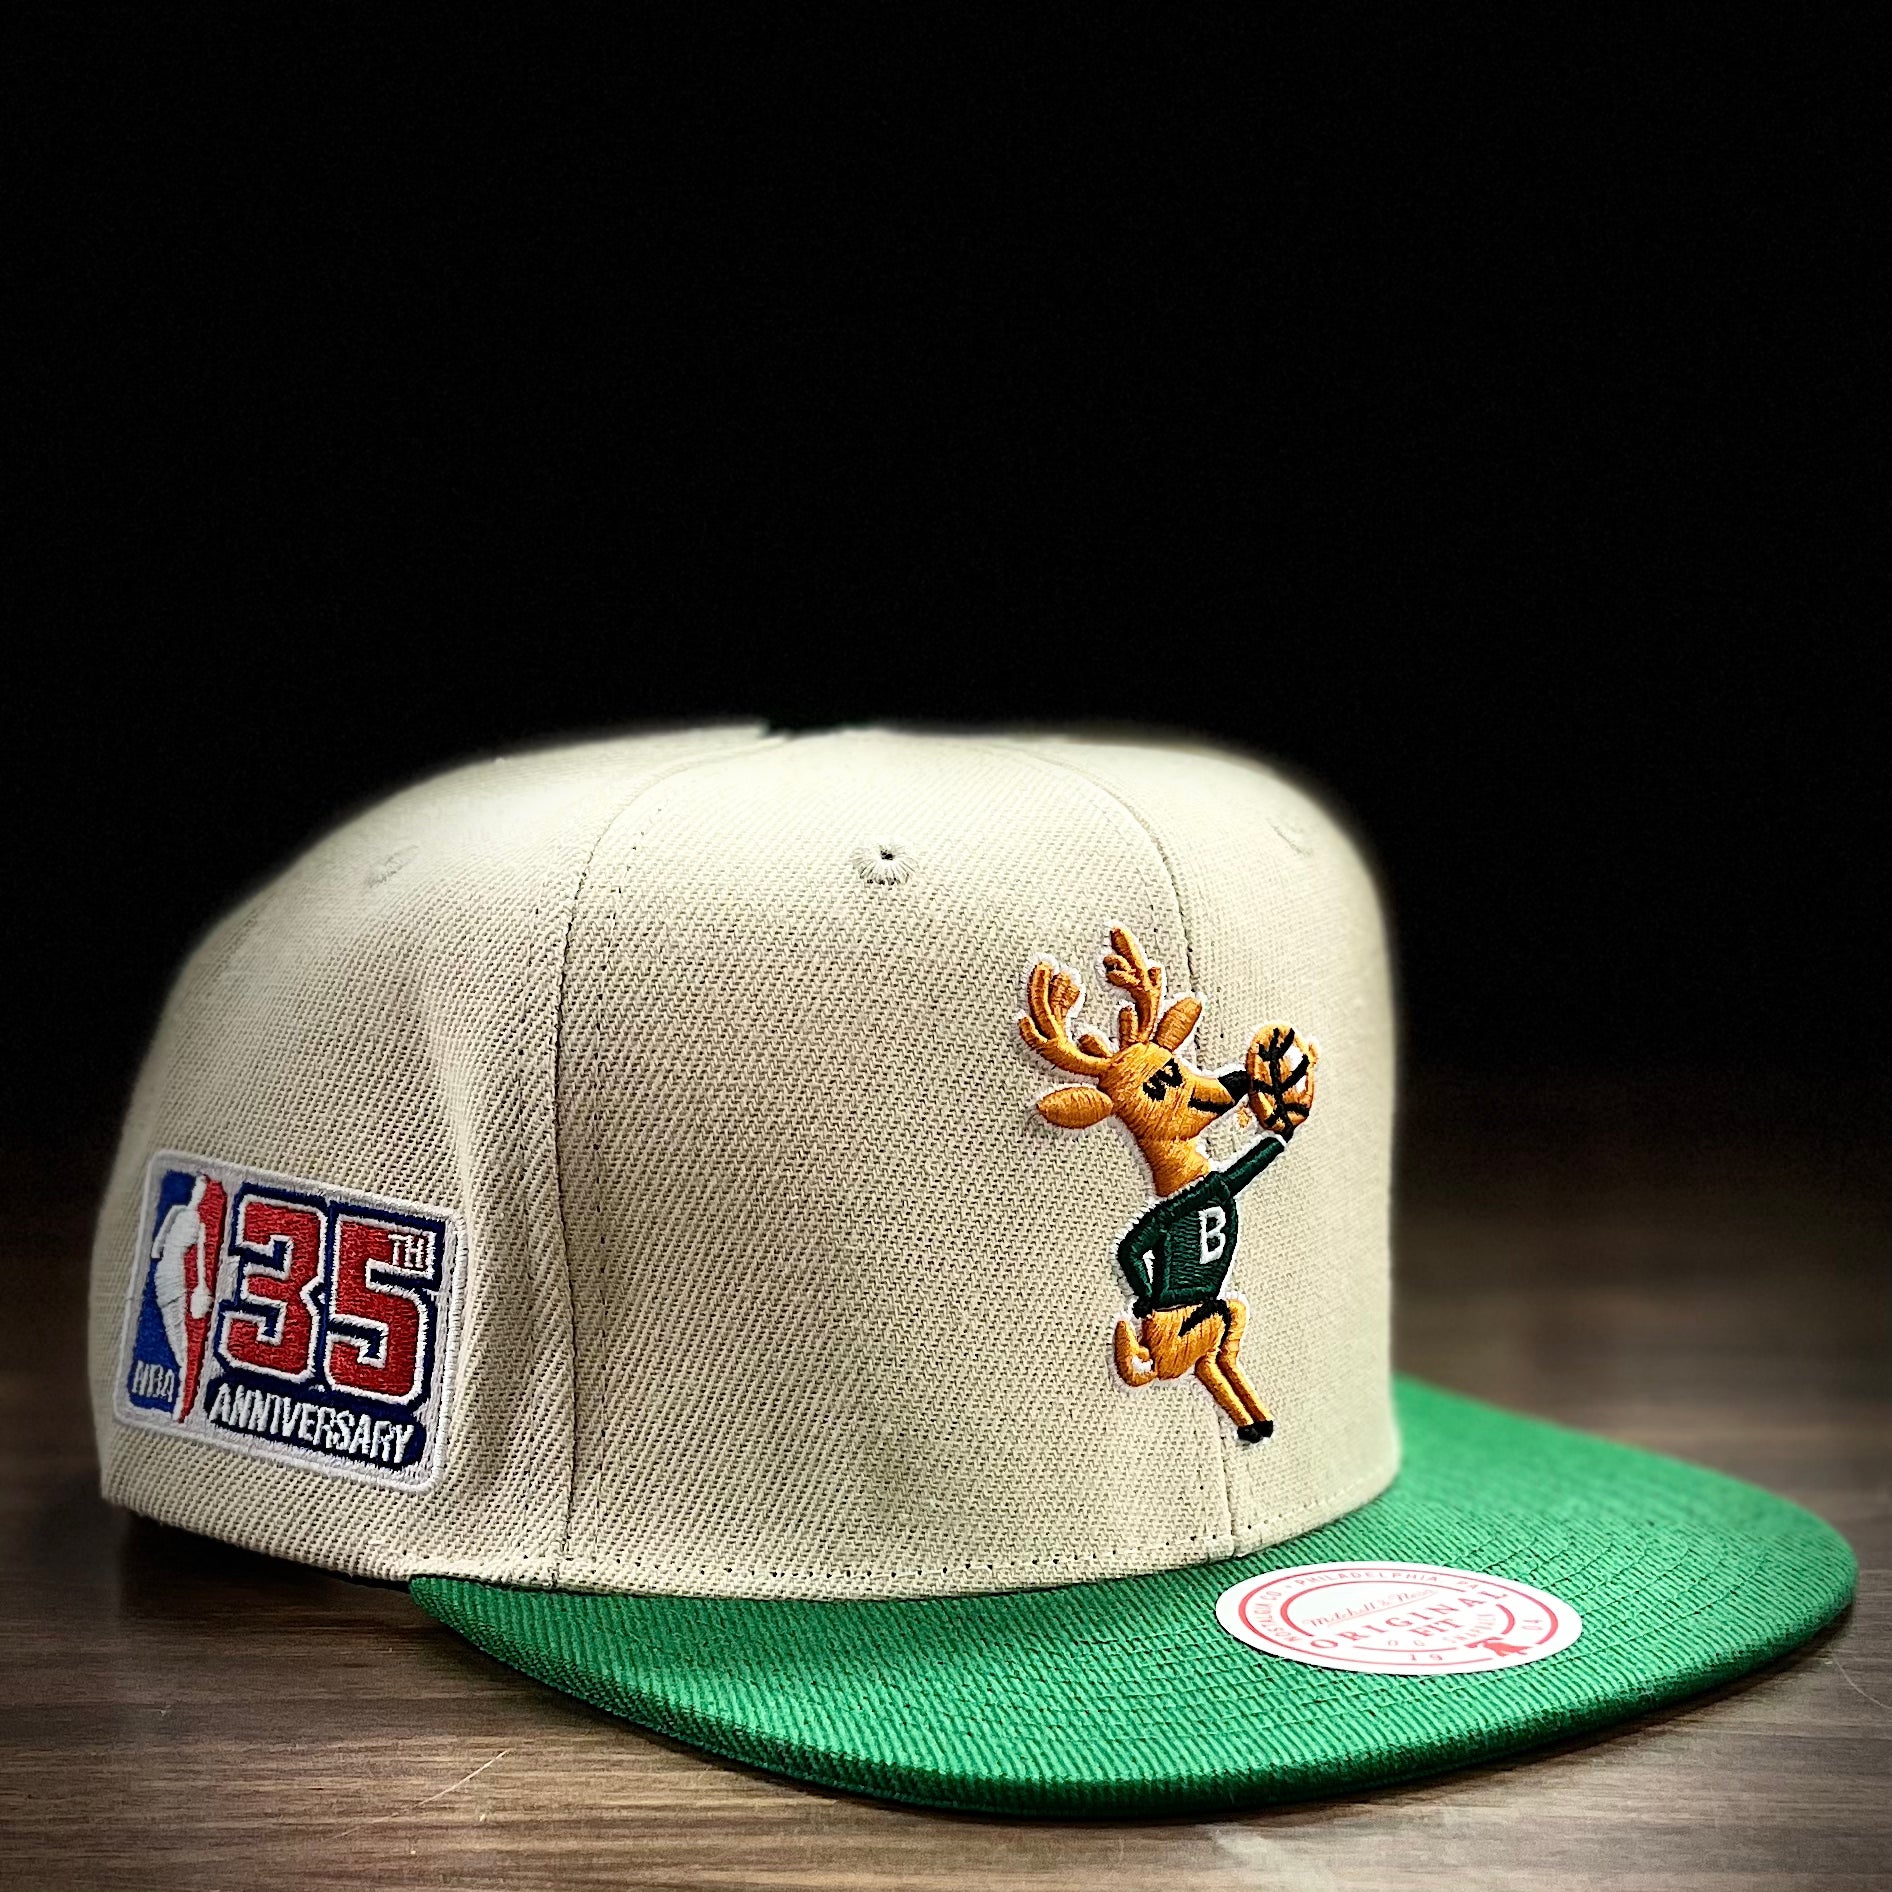 Manufactured by Mitchell & Ness, this Hardwood Classics Flat Bill